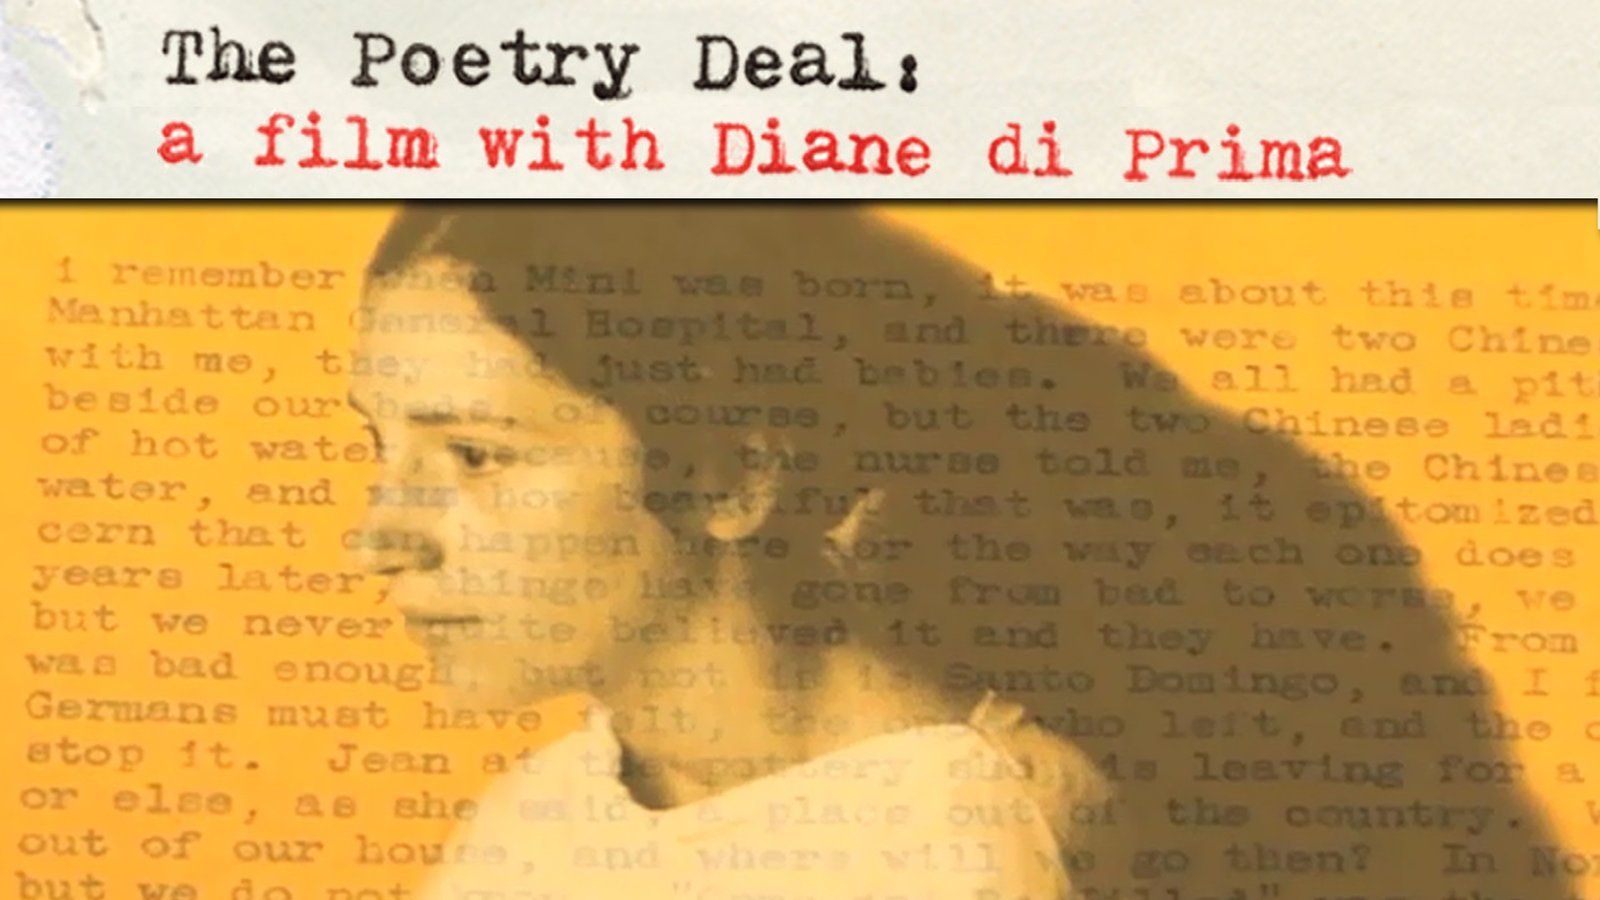 The Poetry Deal - A Portrait of Poet Diane di Prima